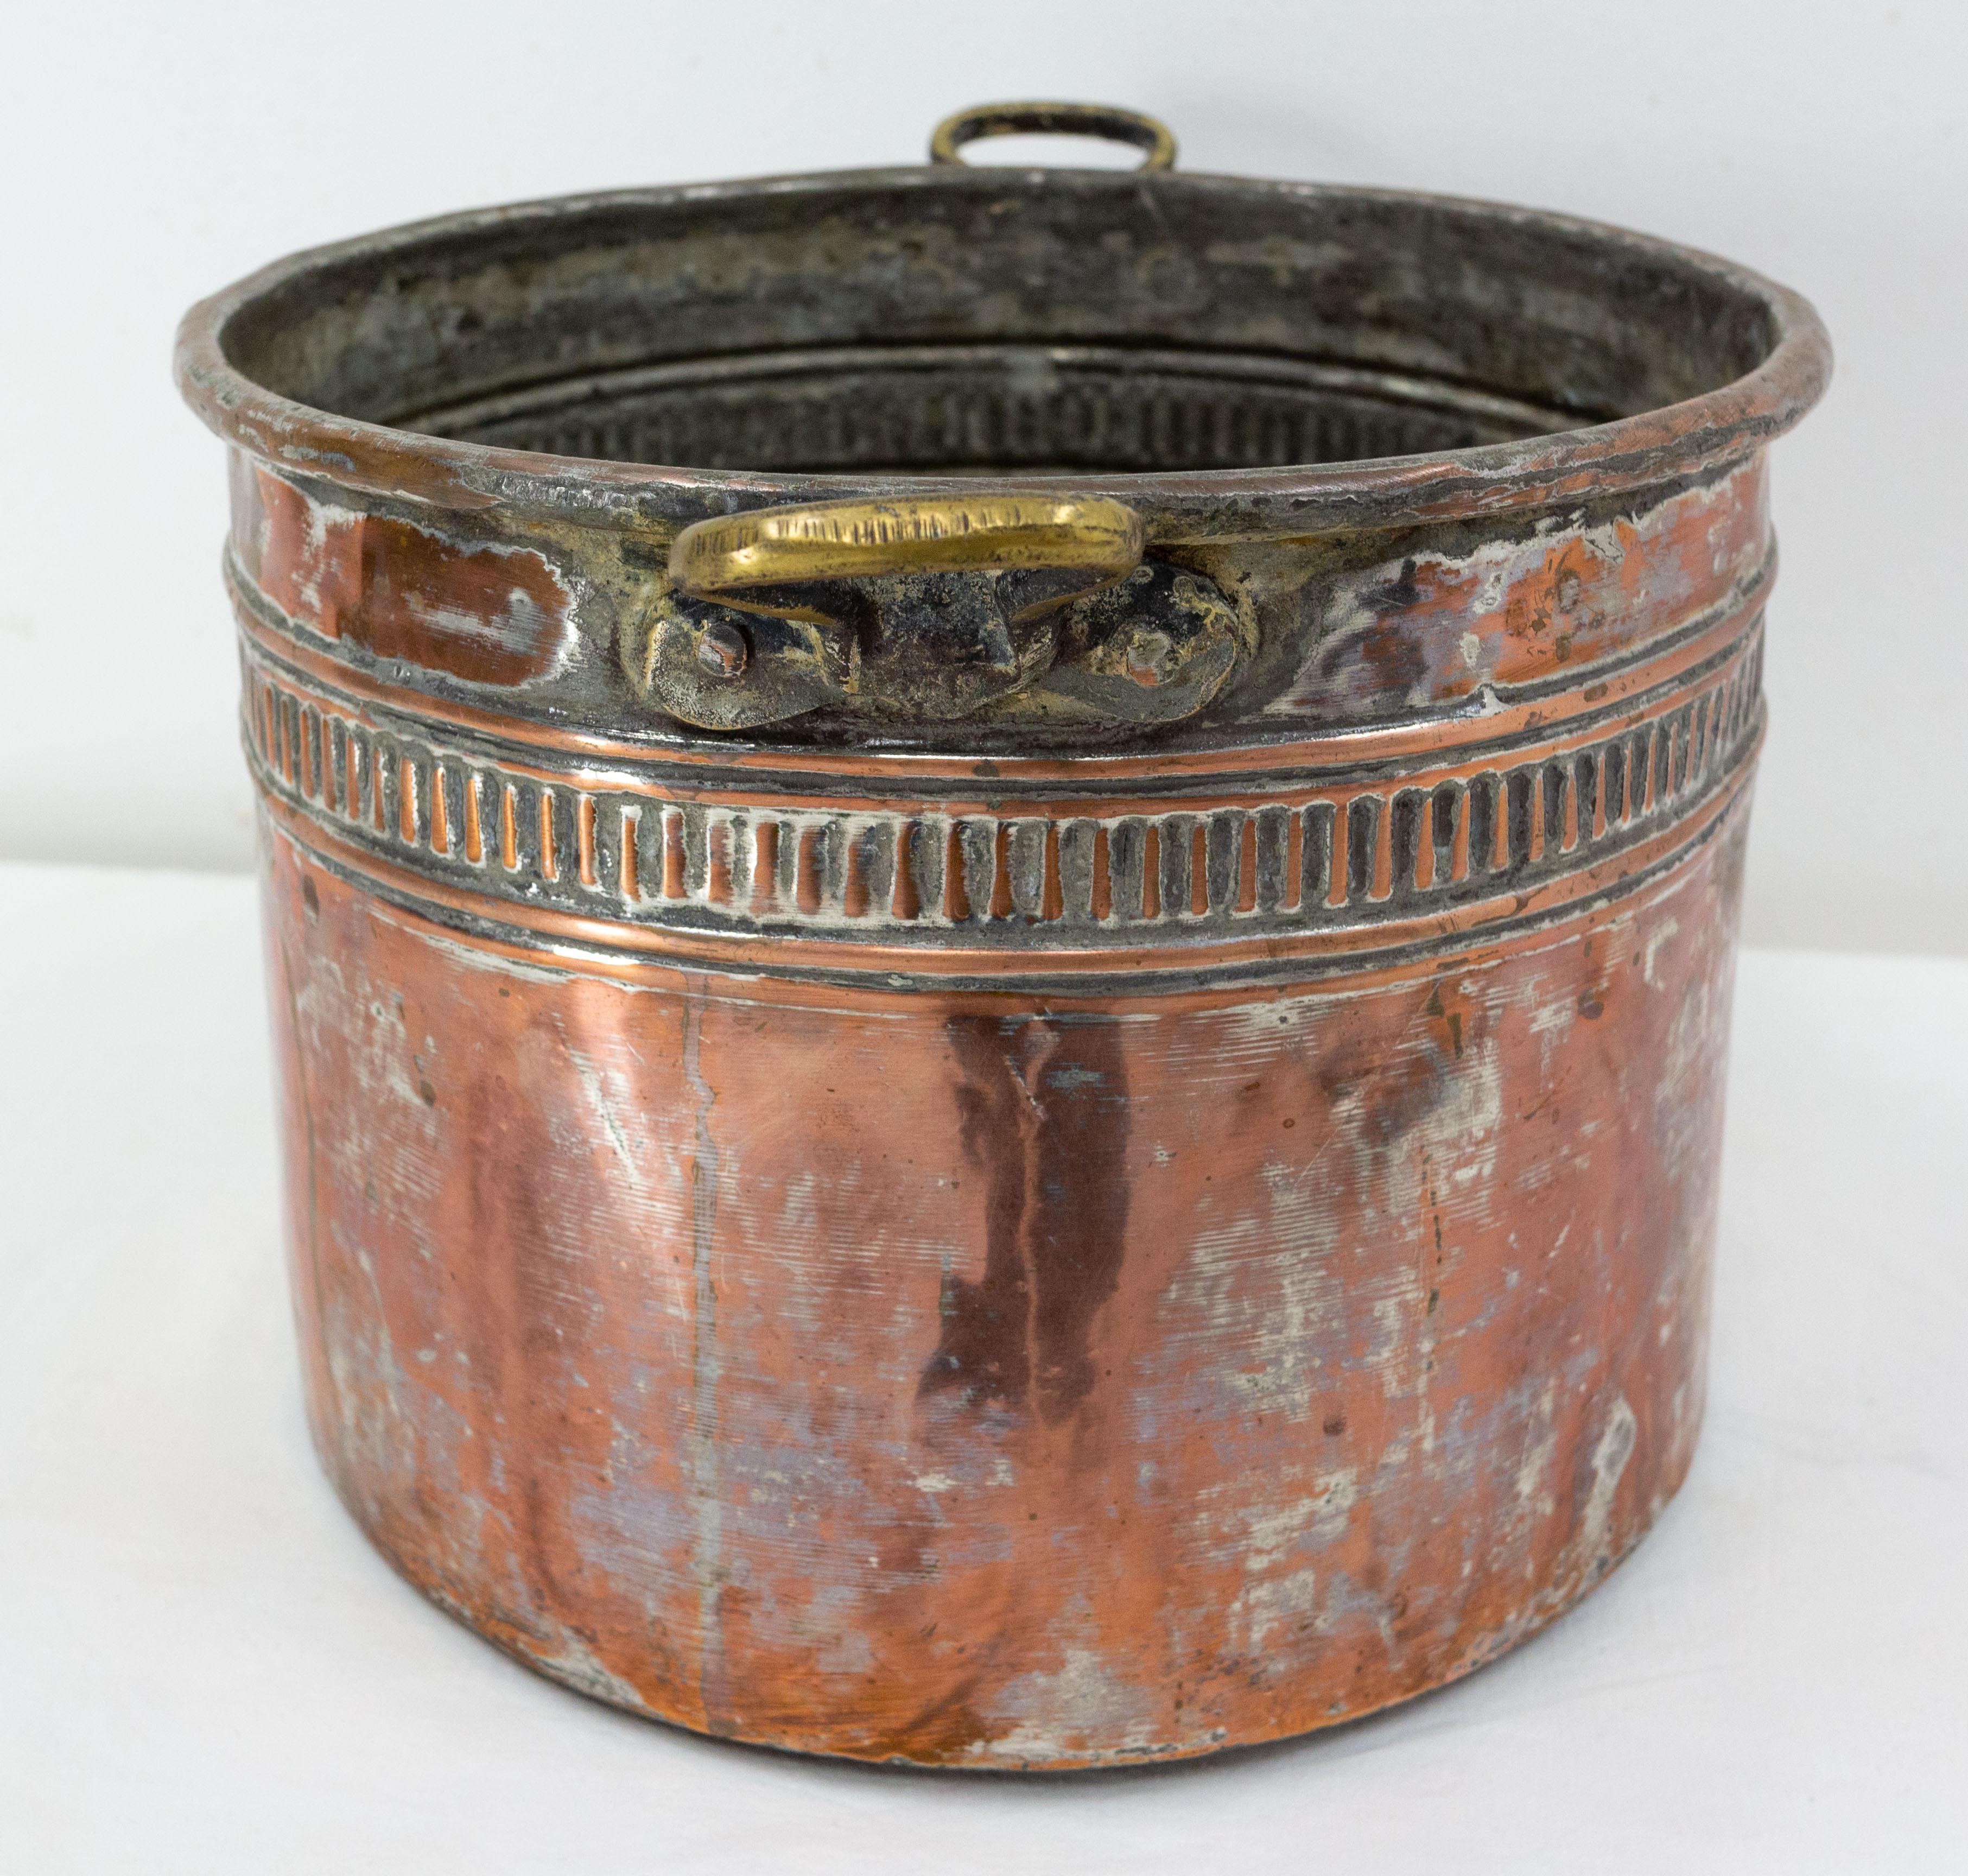 Antique French big pot which can be used as a planter or jardinière.
Copper
If you like it, please see also LU4476227879132 19th century planter copper jardinière with handle, SW France
Good condition.

Shipping:
L34 P26,5 H21 1,380 kg